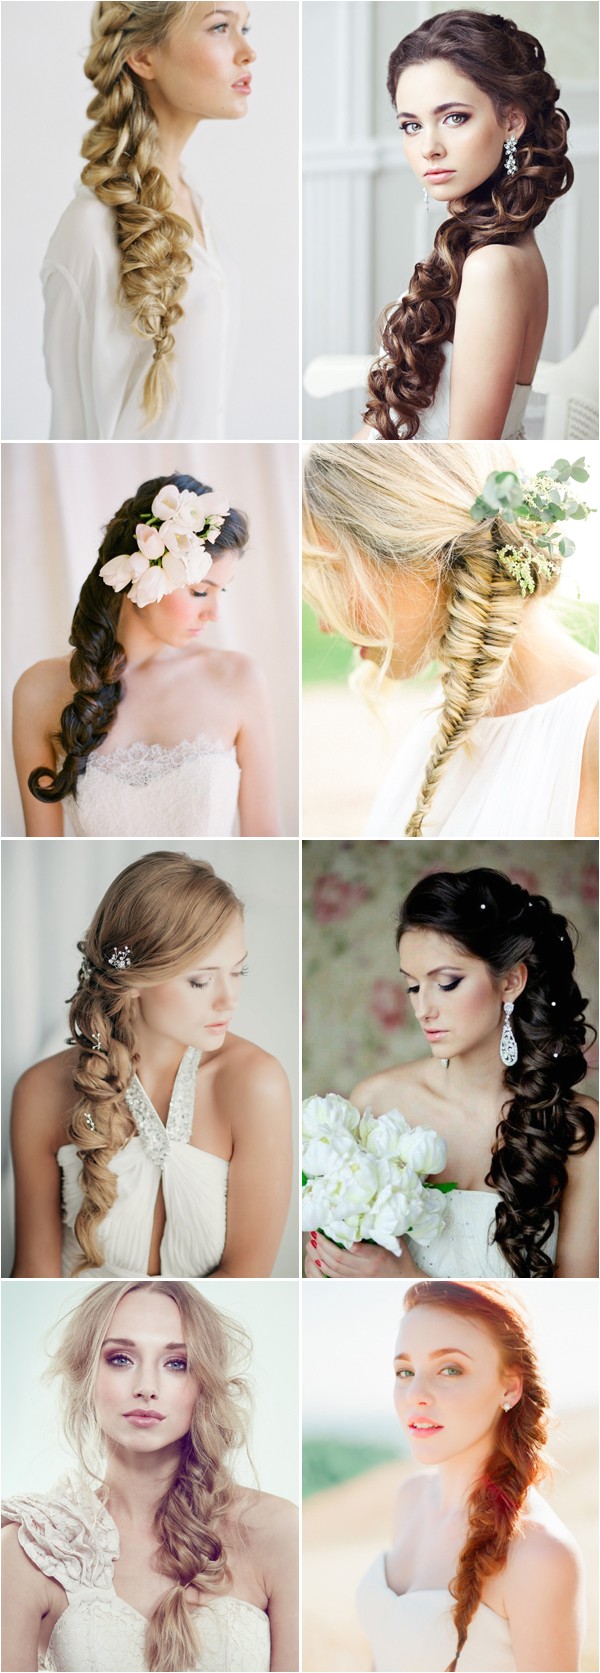 42 wedding hairstyles for long hair